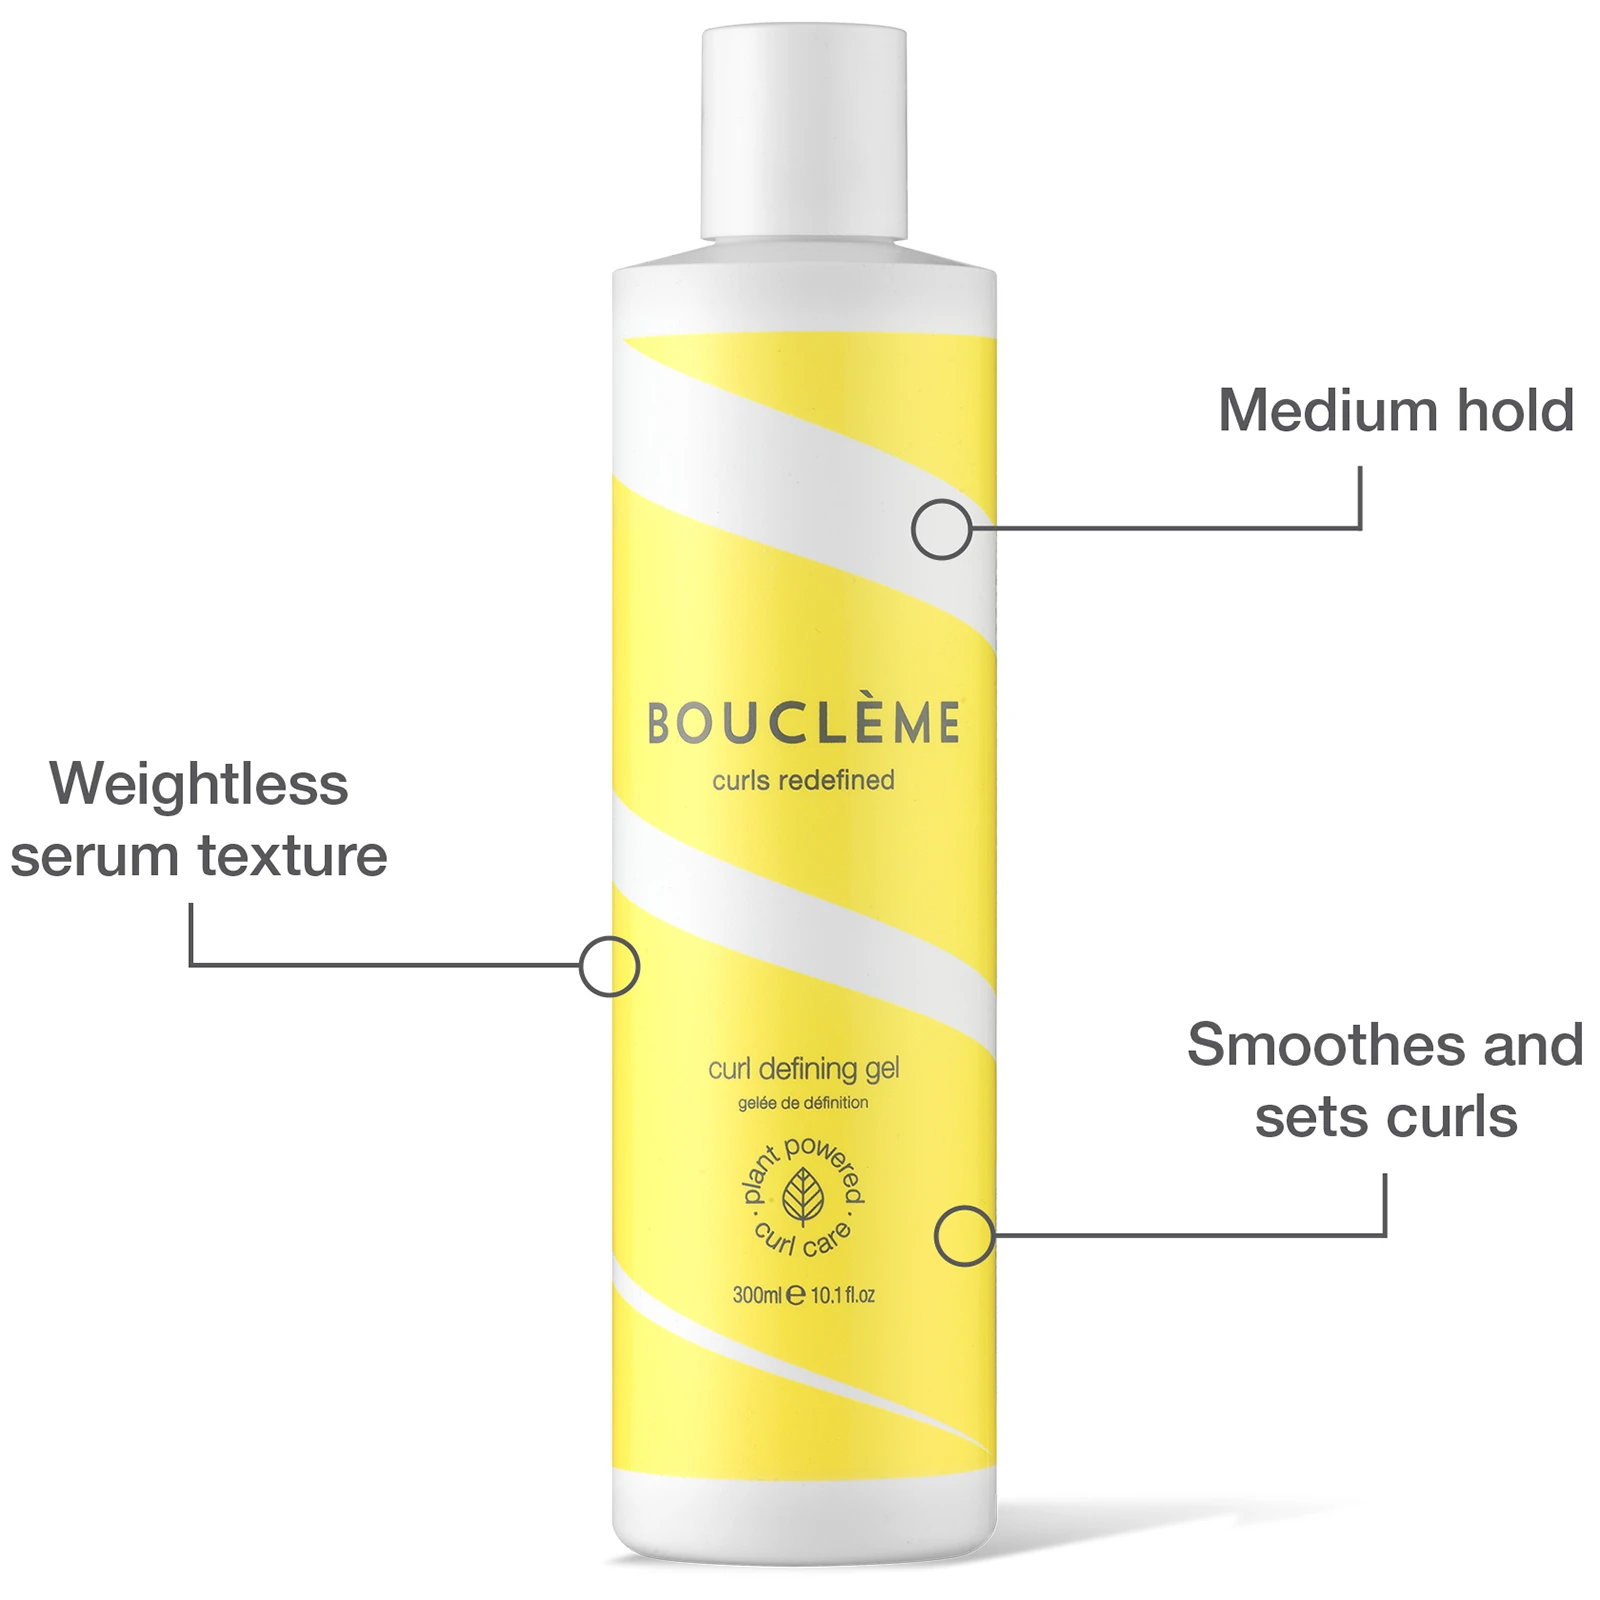 medium hold, weightless serum texture, smoothes and sets curls